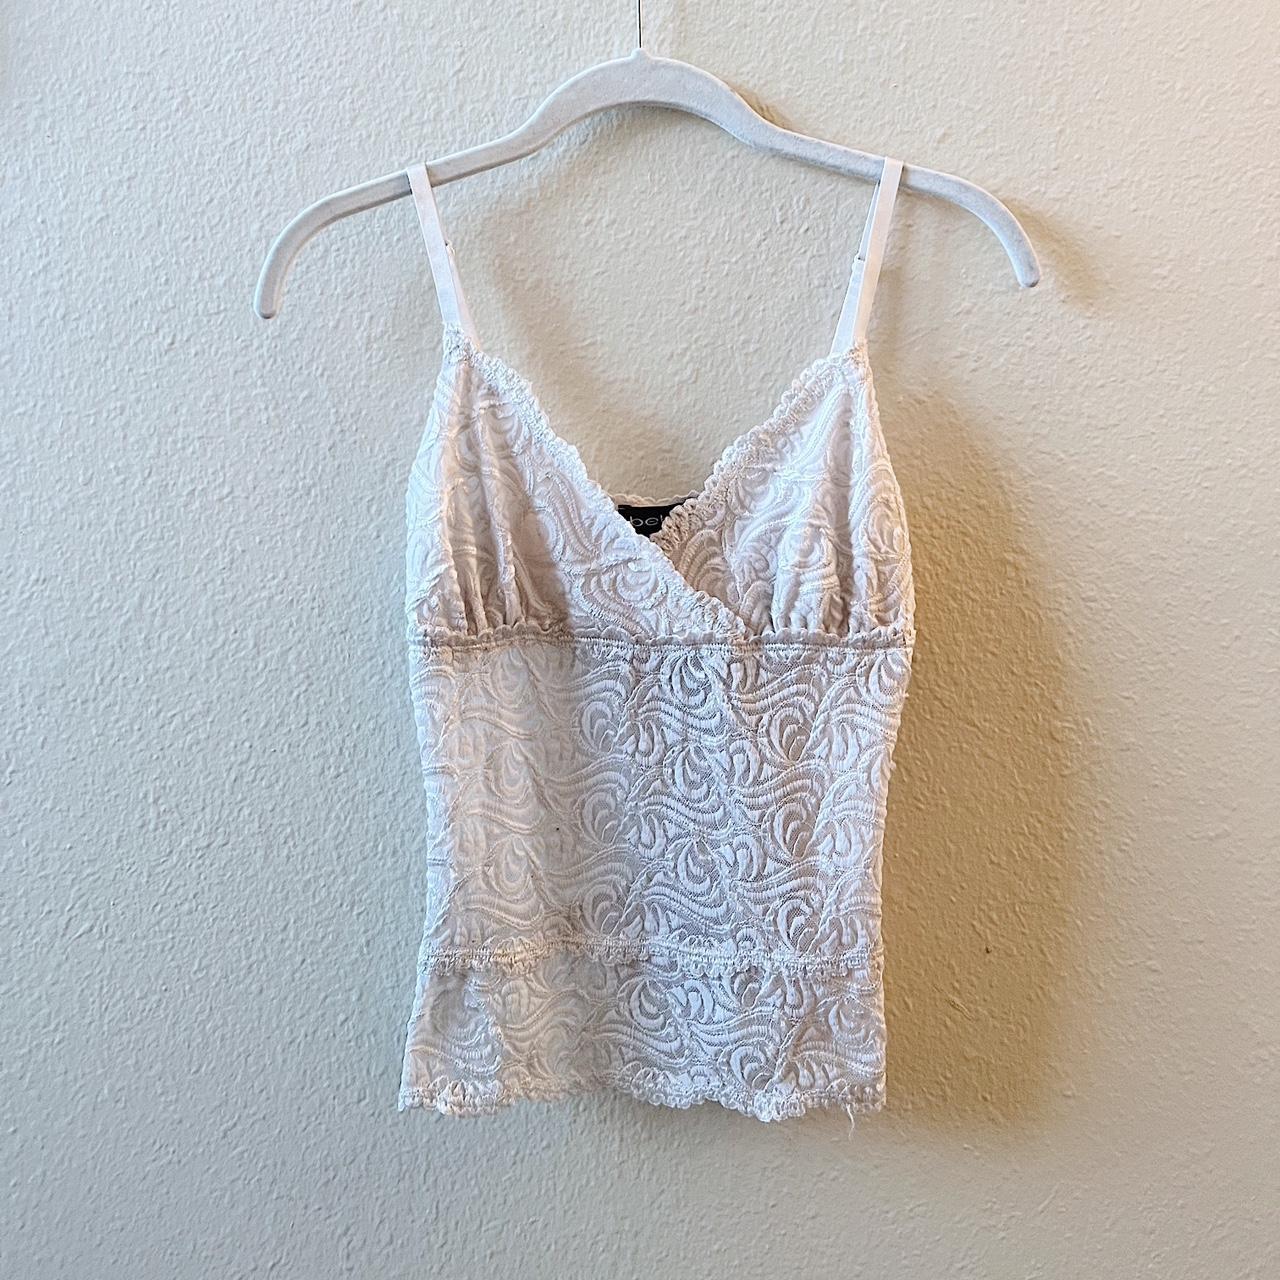 Gorgeous cream lace Bebe tank This tank is a... - Depop